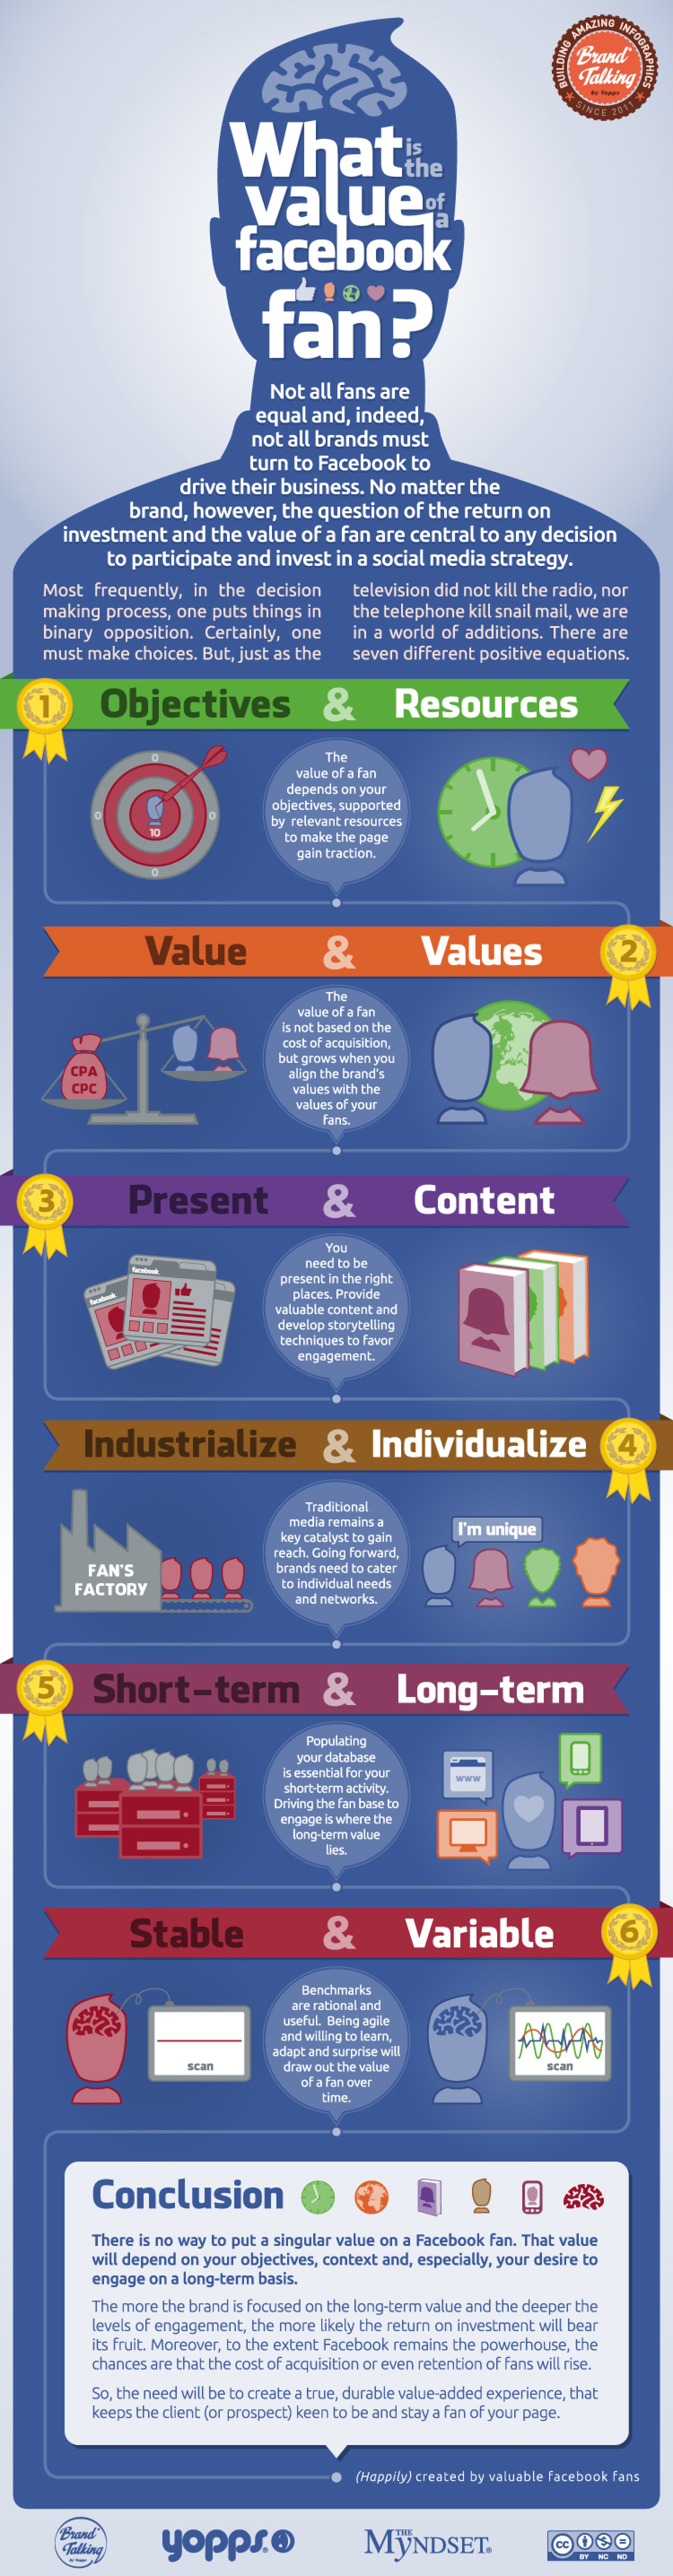 What is the value of a Facebook fan? Infographic